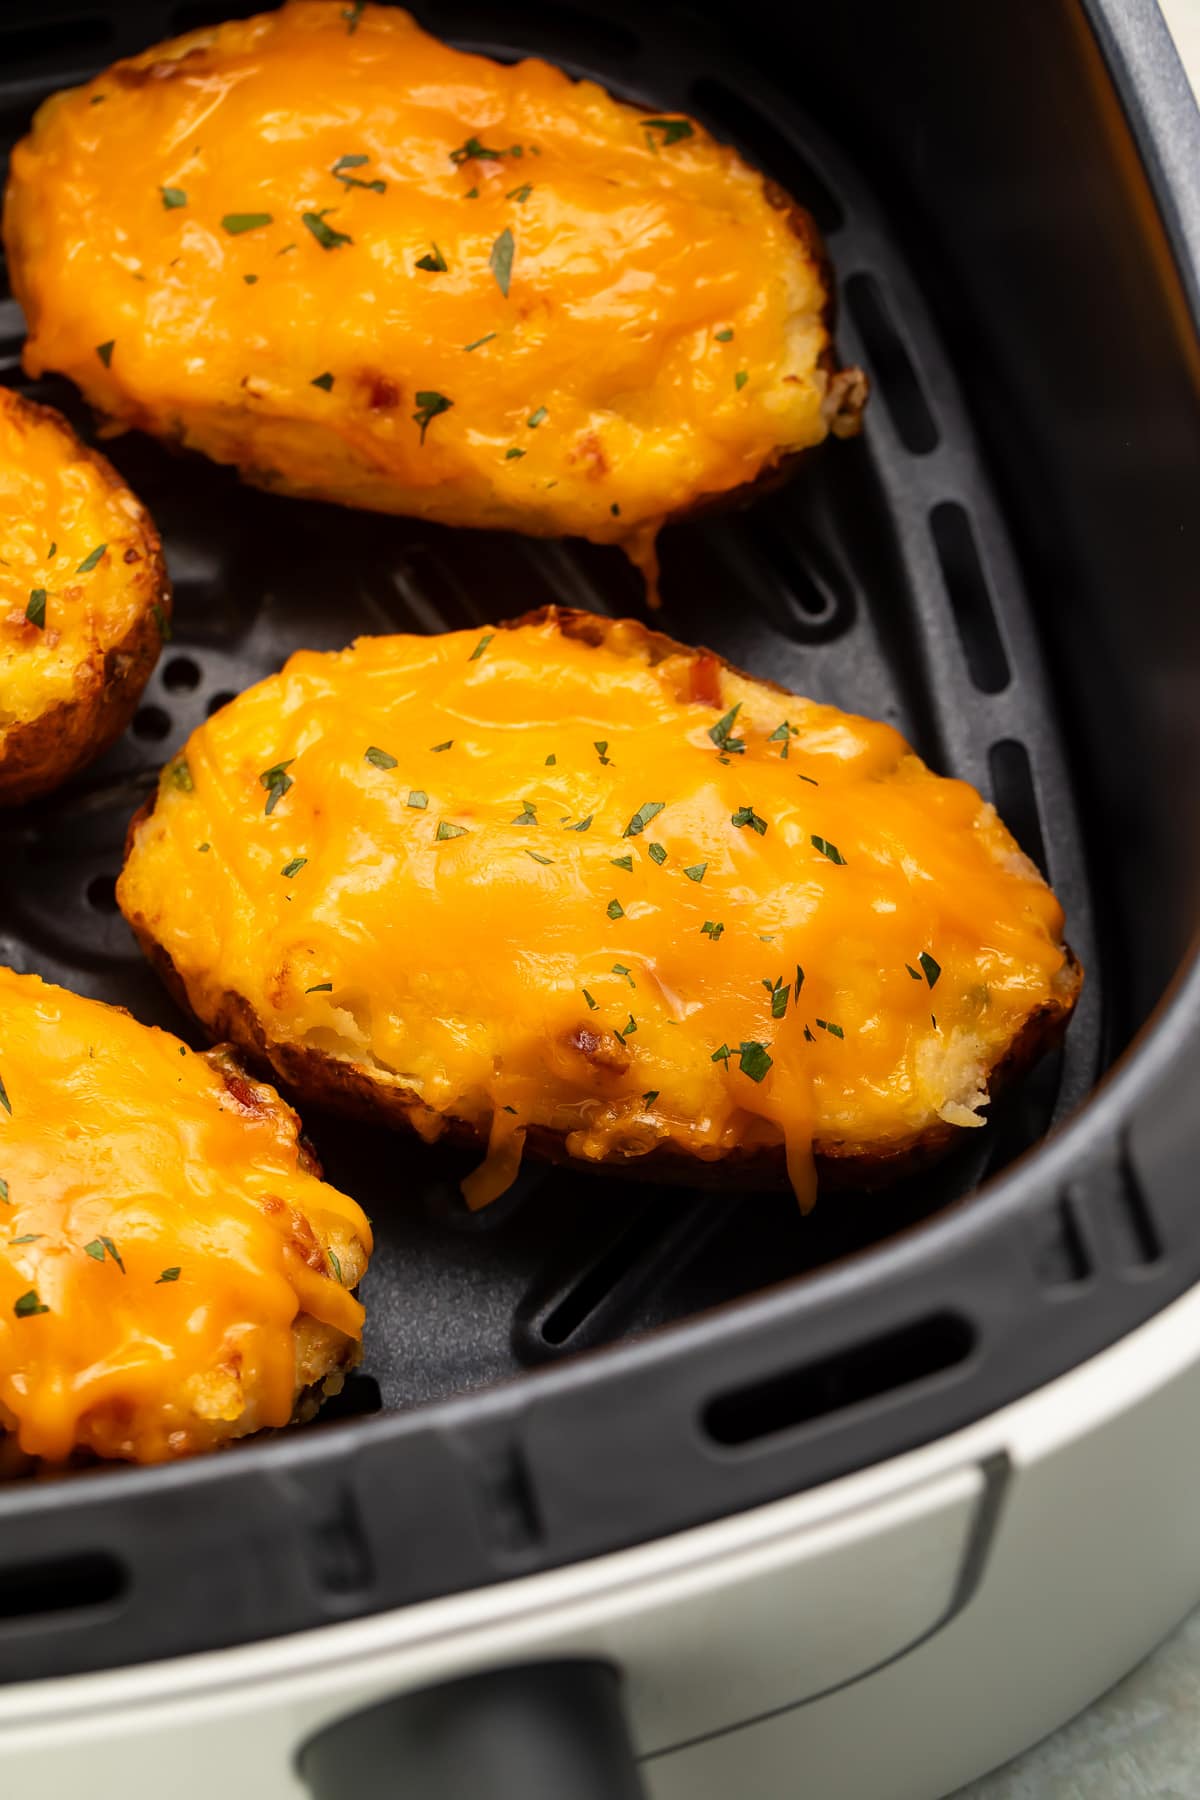 Twice baked potatoes in an air fryer basket. The potatoes are topped with a layer of melted cheddar and a garnish of chives.